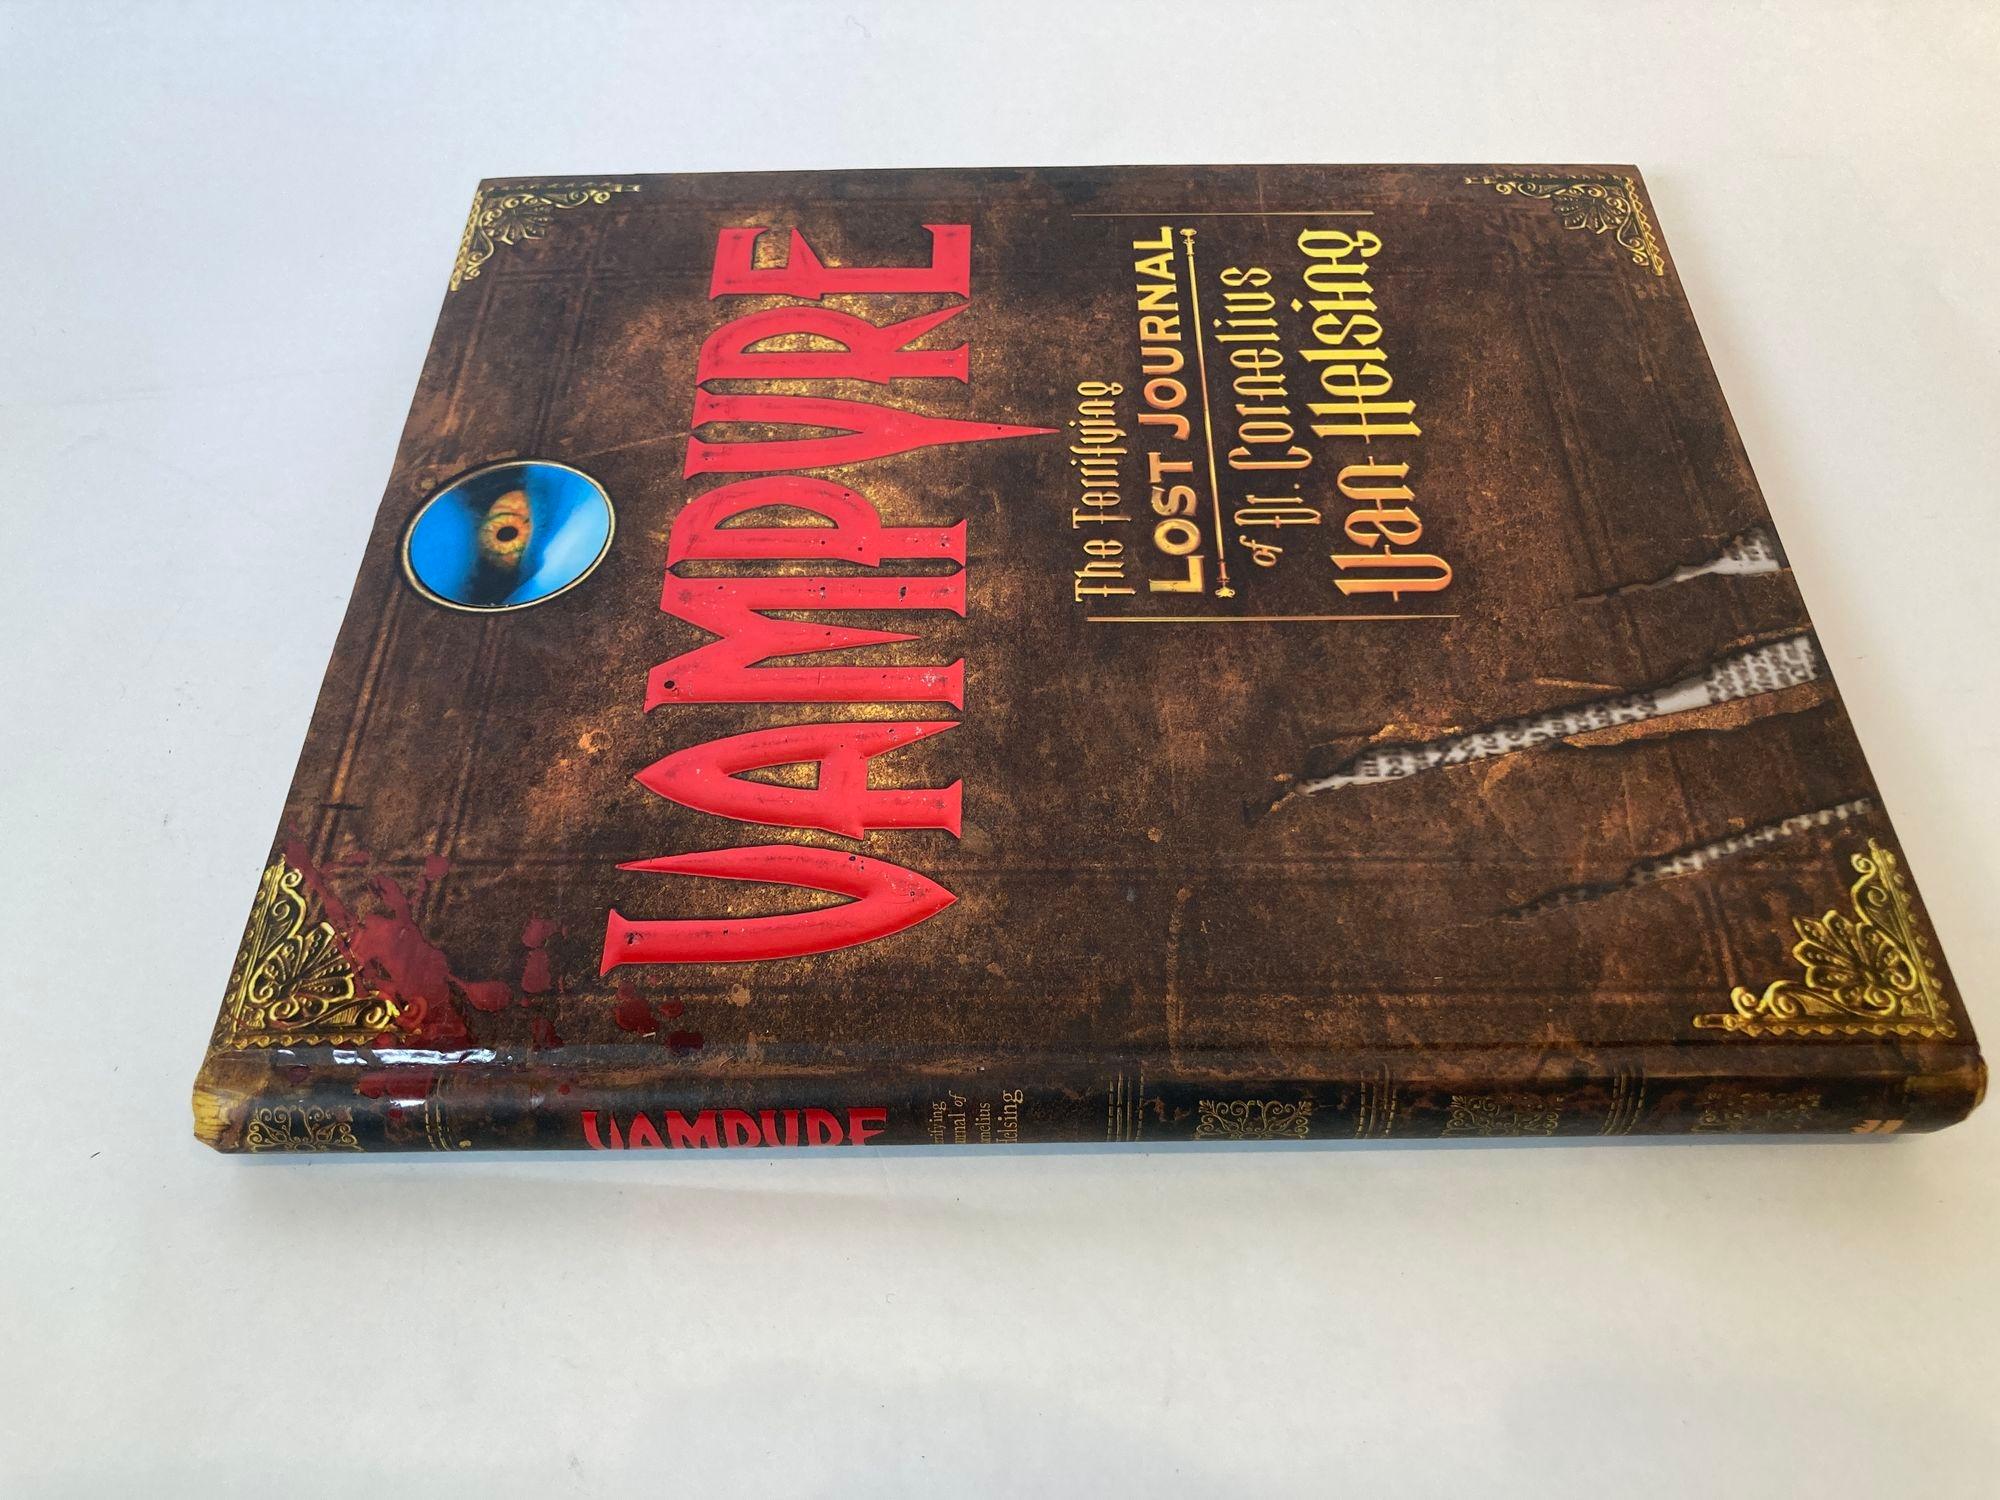 Vampyre, The Terrifying Lost Journal of Dr. Cornelius Van Helsing by Knight, Mary-Jane.
Published by Harper Collins, 2007.
Vampyre! The name alone strikes terror into the hearts of most mortals . . . but not Dr. Cornelius Van Helsing--a doctor by